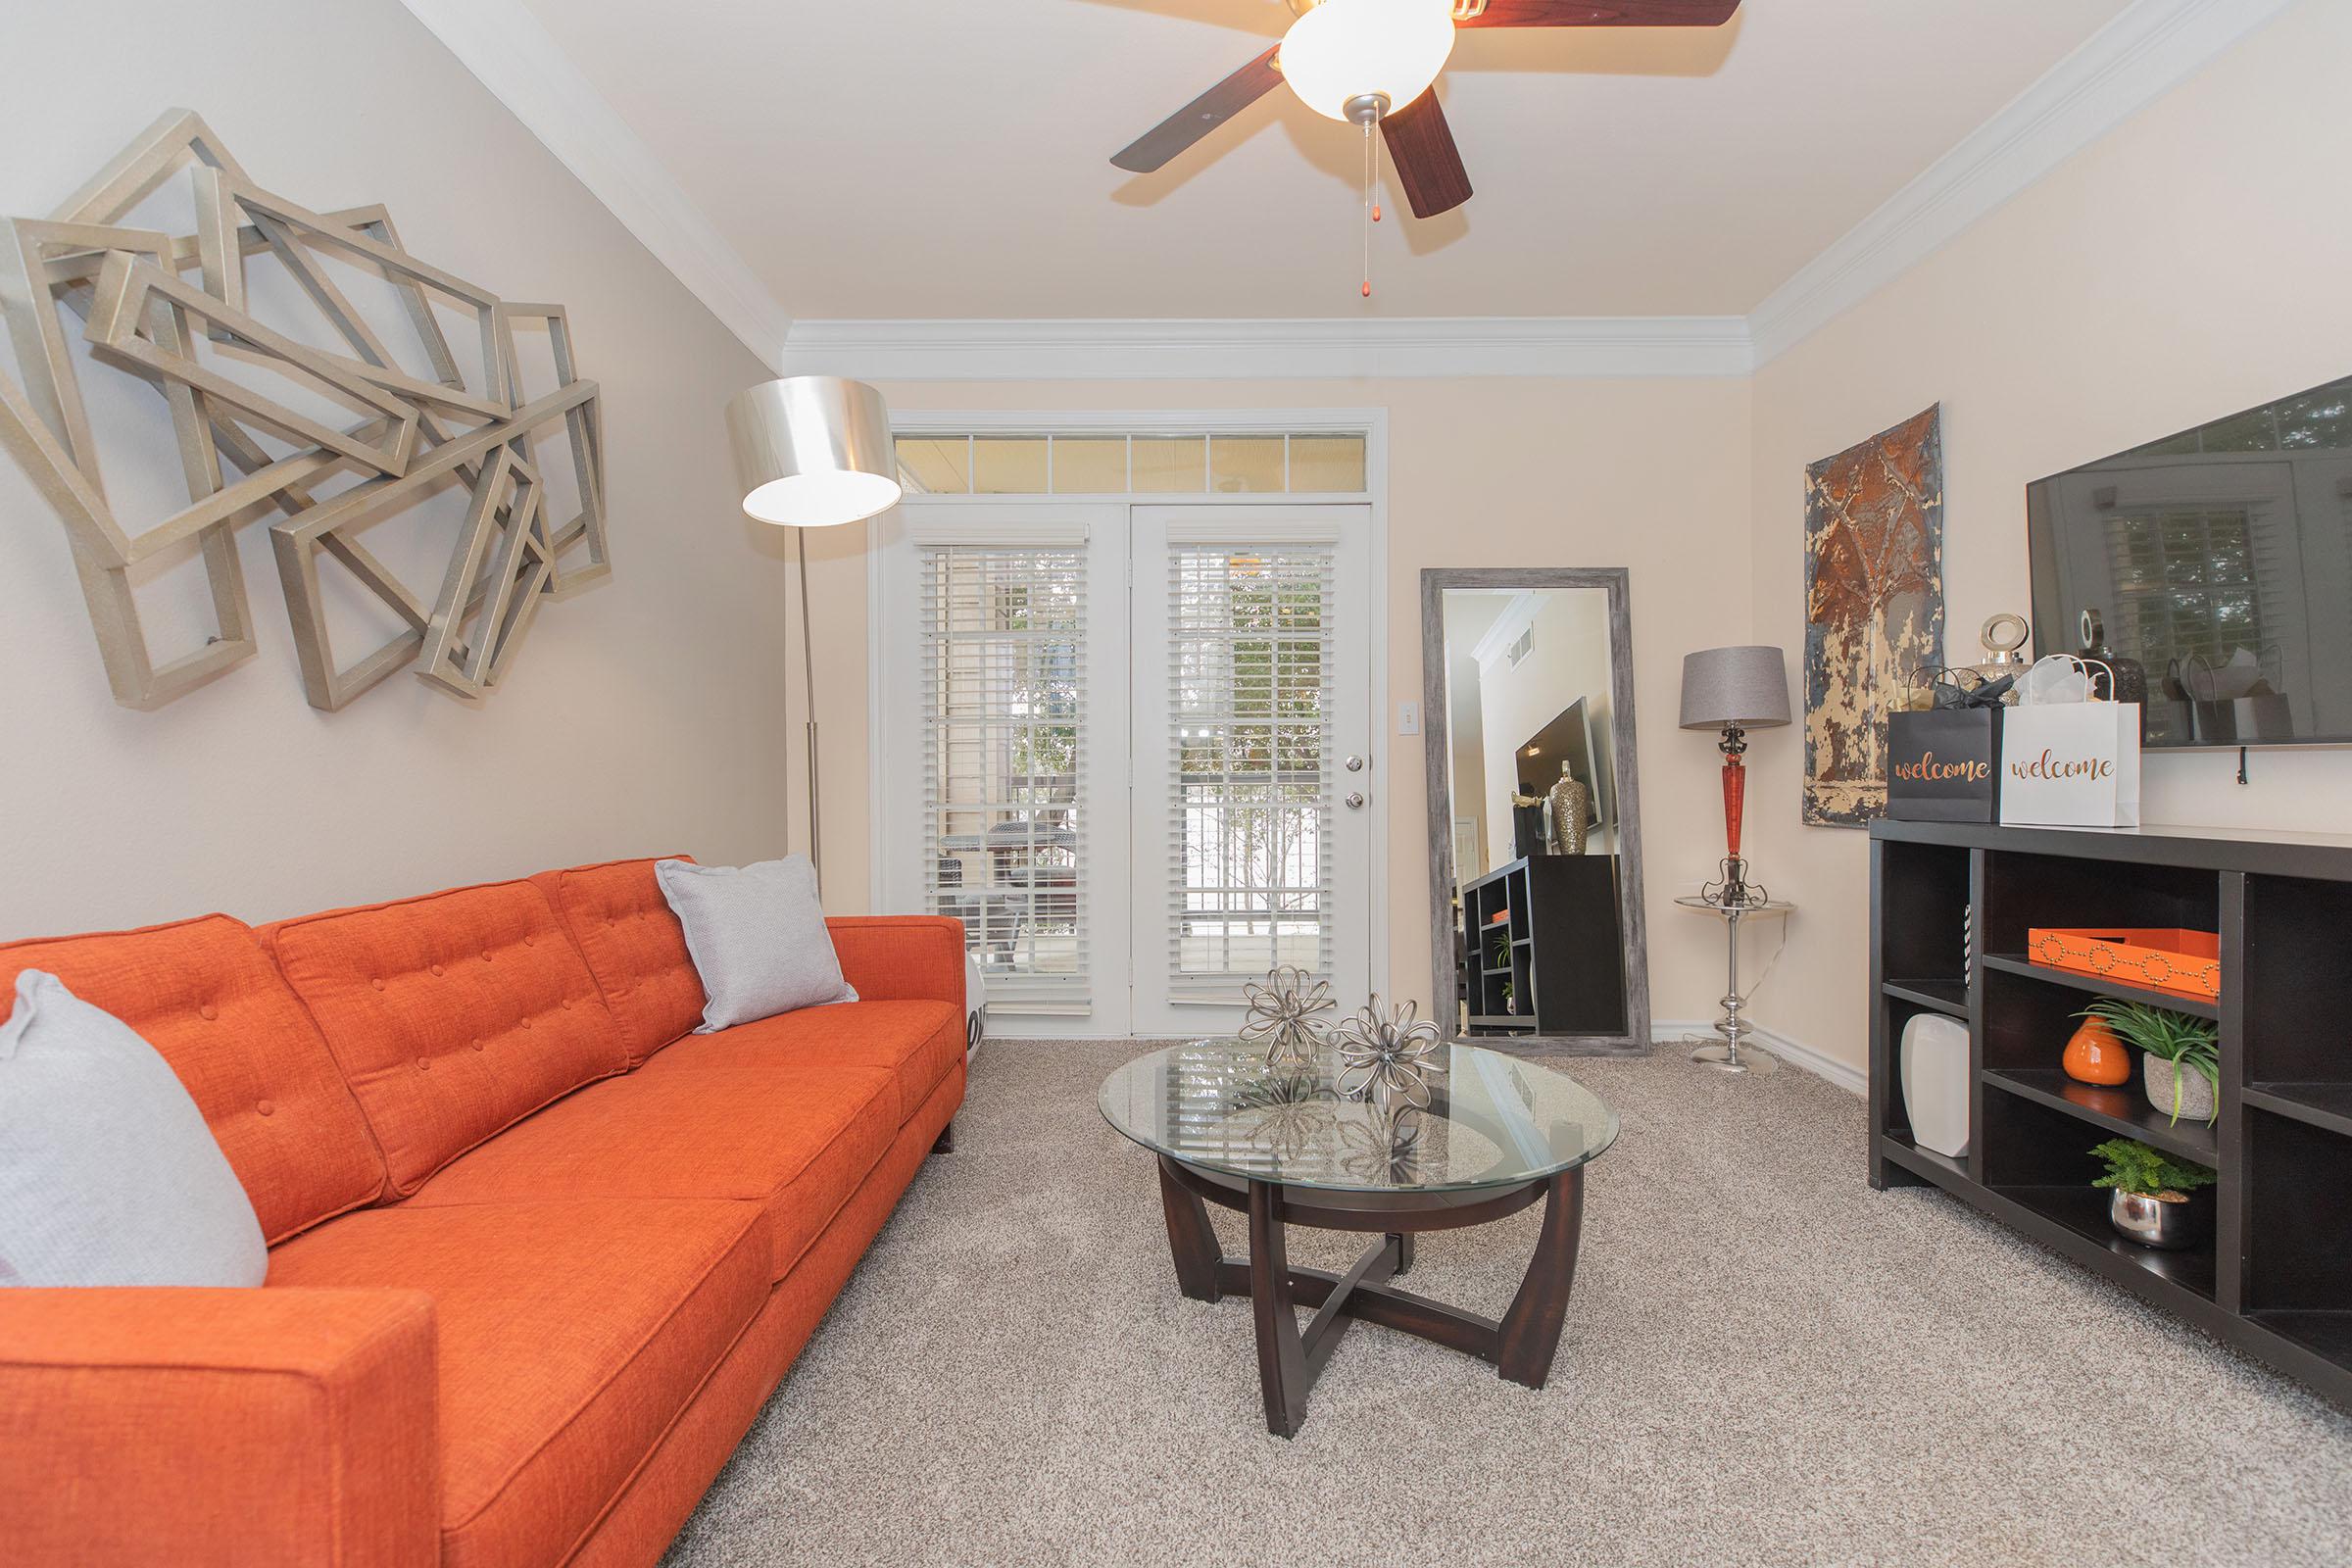 furnished carpeted living room with an orange couch